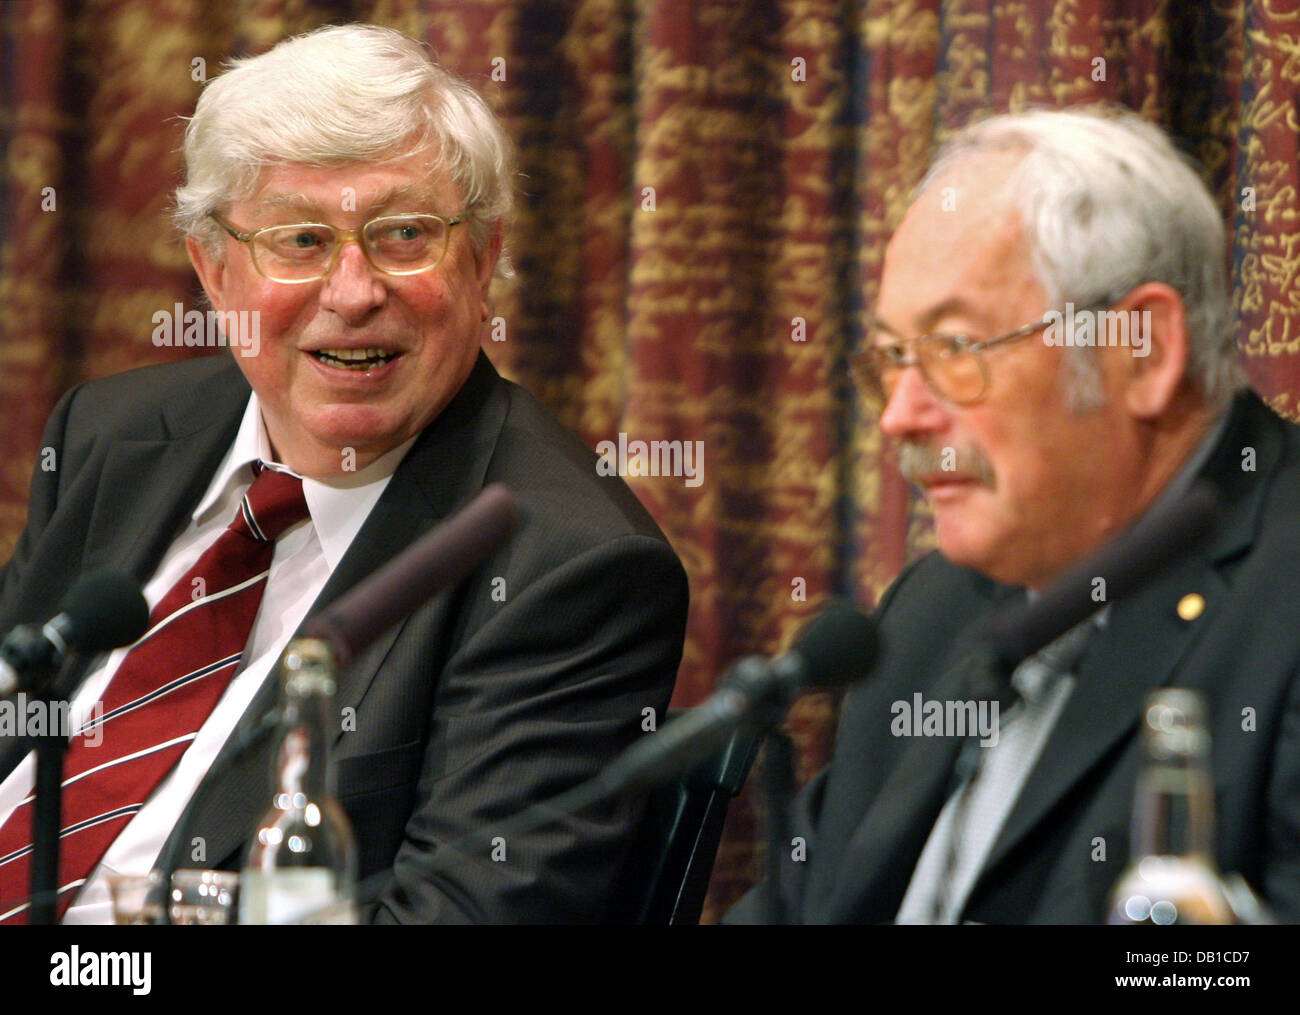 German Gerhard Ertl (L), Laureate of the 2007 Nobel Prize for Chemistry, sits next to German Peter Gruenberg, Laureate of the 2007 Nobel Prize for Phyiscs, during a press conference at the Royal Swedish Academy of Sciences in Stockholm, Sweden, 07 December 2007. Laureates of the Nobel Prizes for Phyiscs, Chemistry and Economy were invited to the Swedish Academy just prior to the be Stock Photo